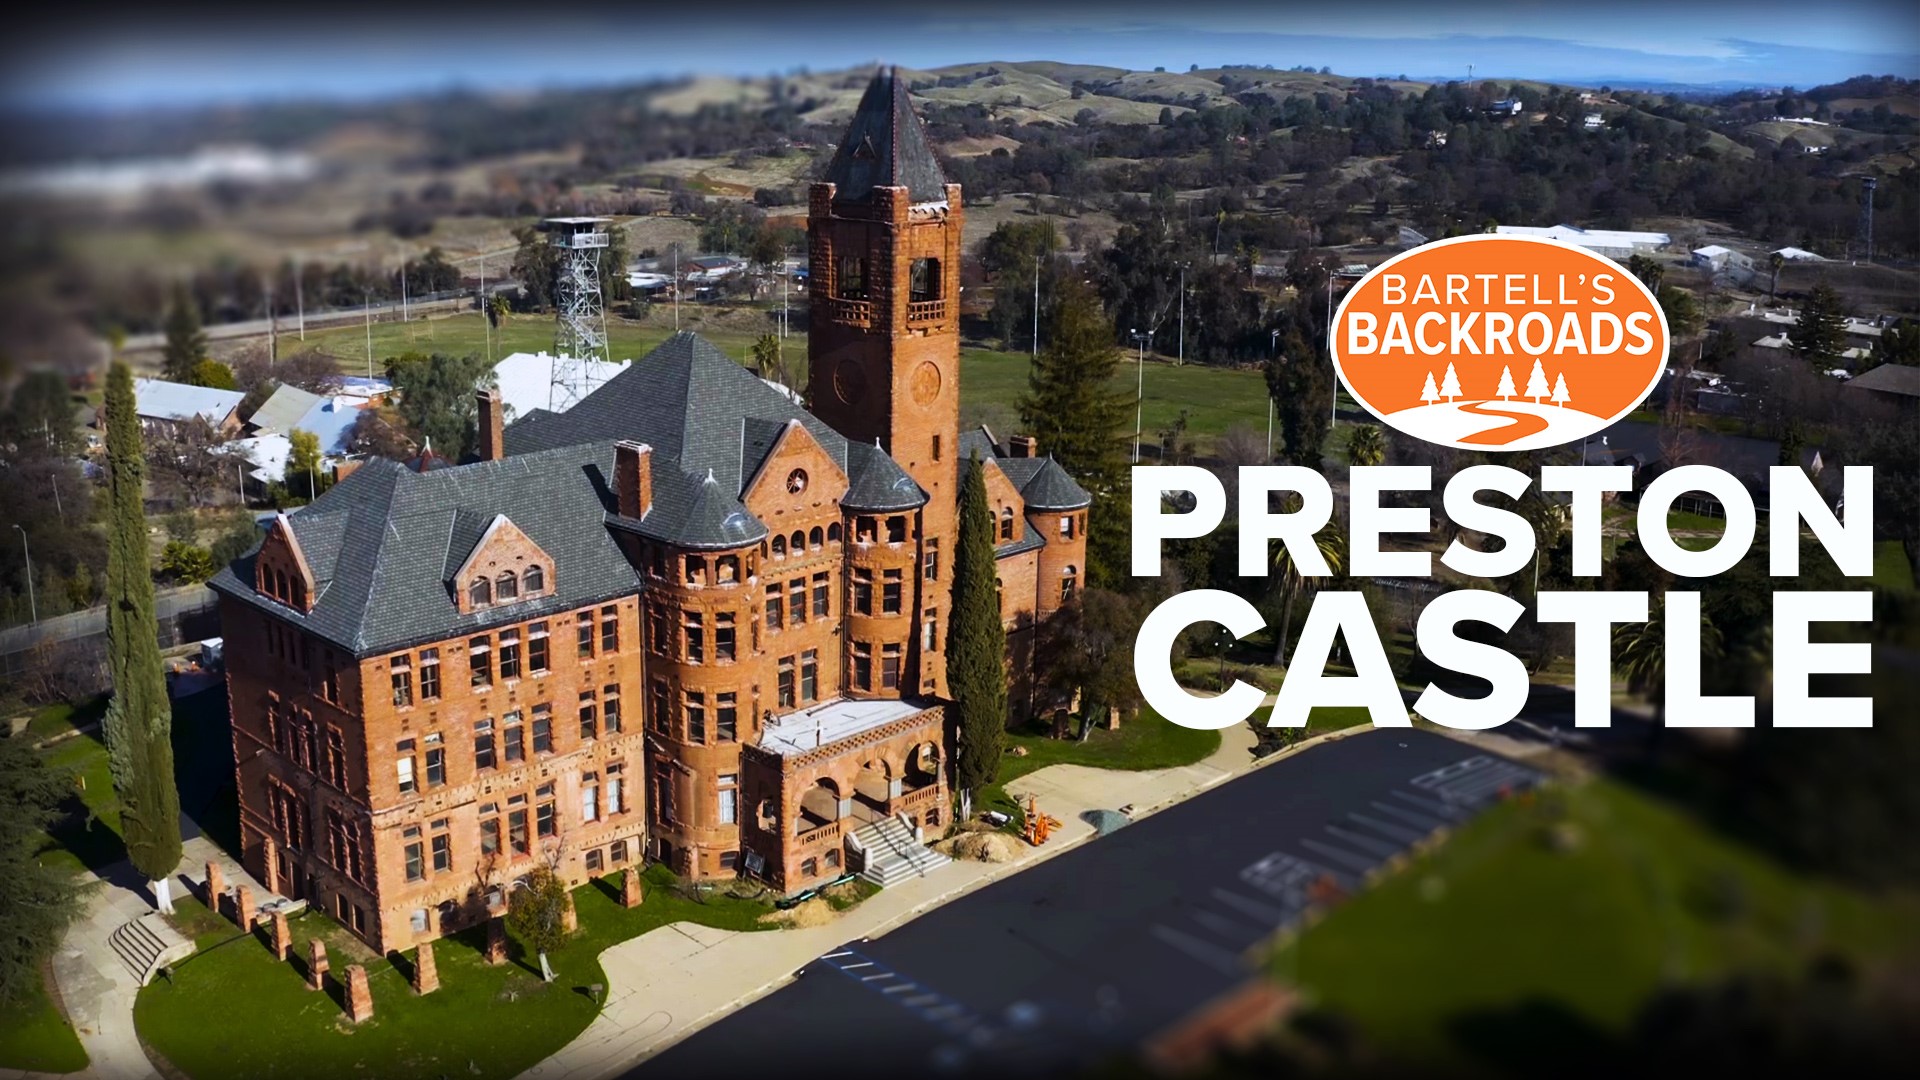 The Preston Castle was the state’s first boys reform school. It was a tourist attraction, until the pandemic hit.